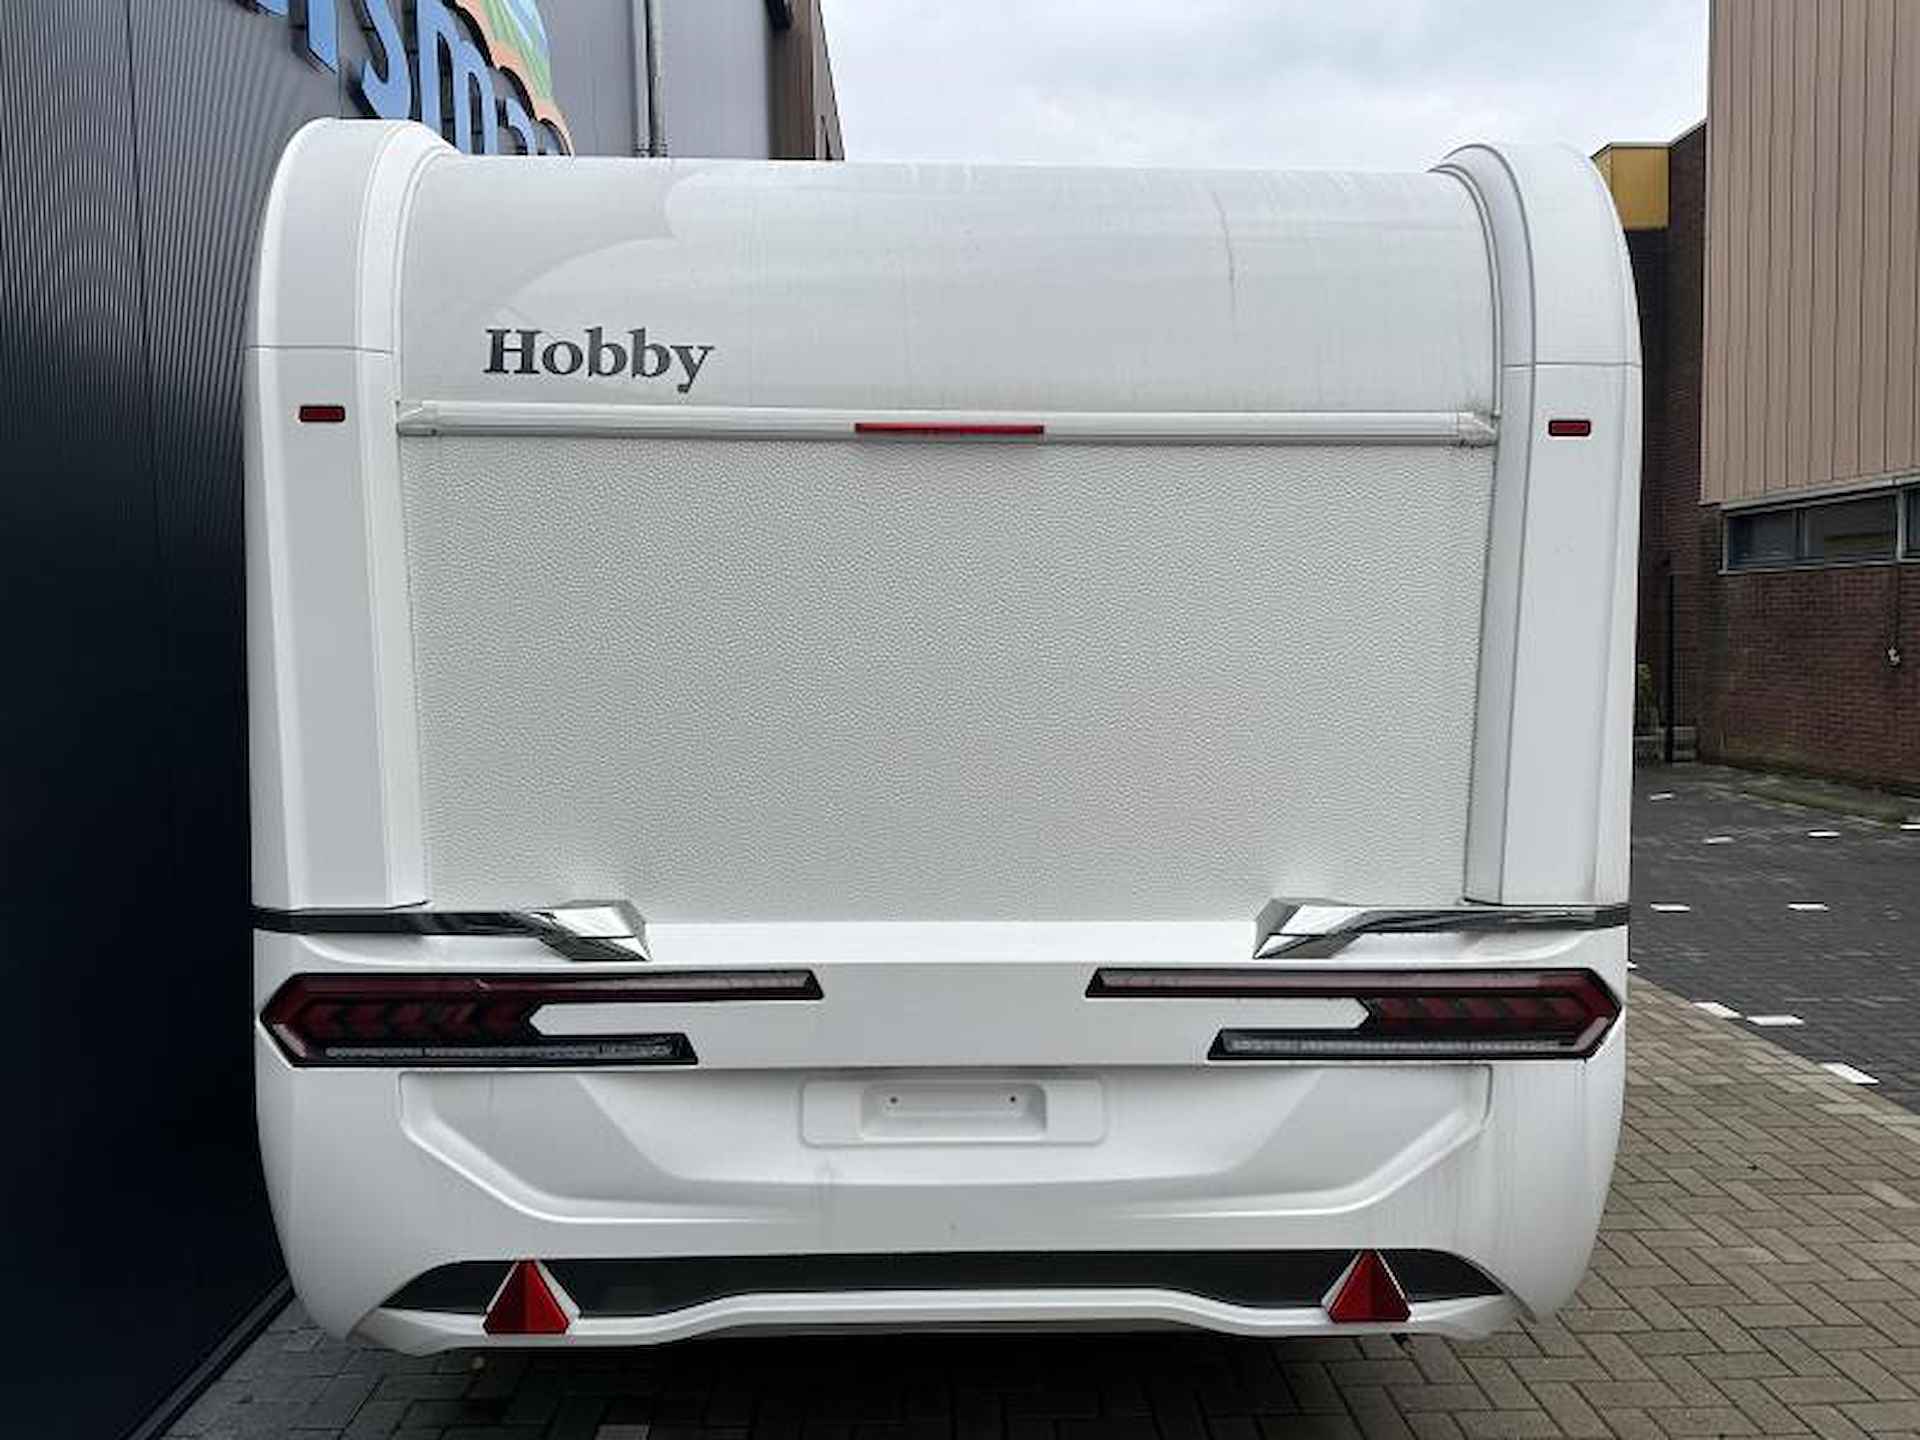 Hobby Excellent Edition 490 KMF Stapelbed indeling - 6/22